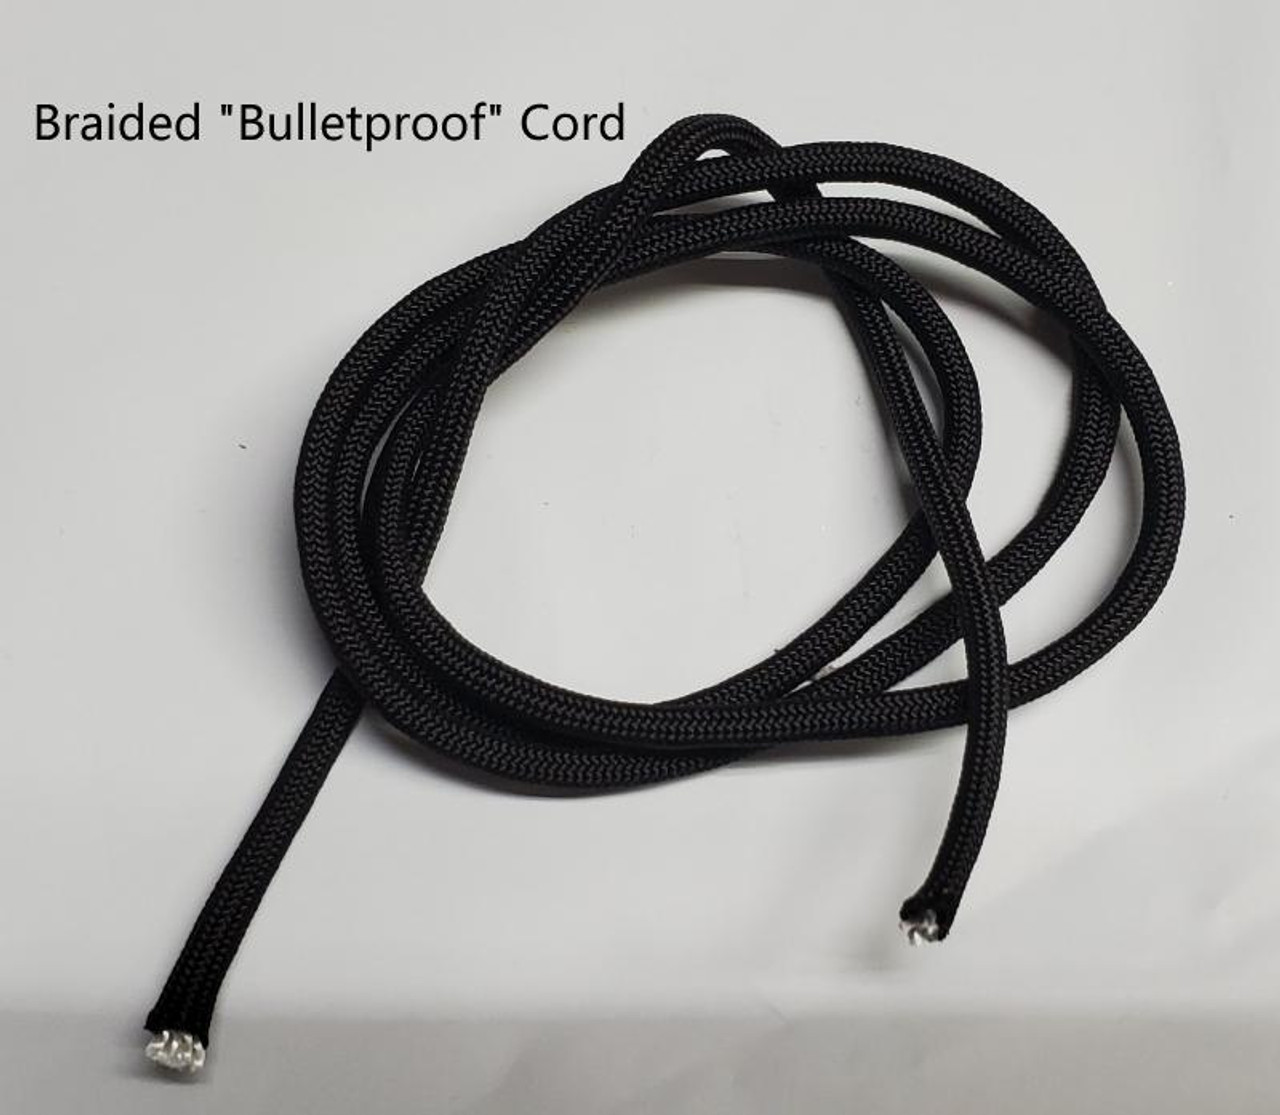 Ultra Fine Thin Wire Black Coating Multiple Strand Mounting Electronic Line  Part